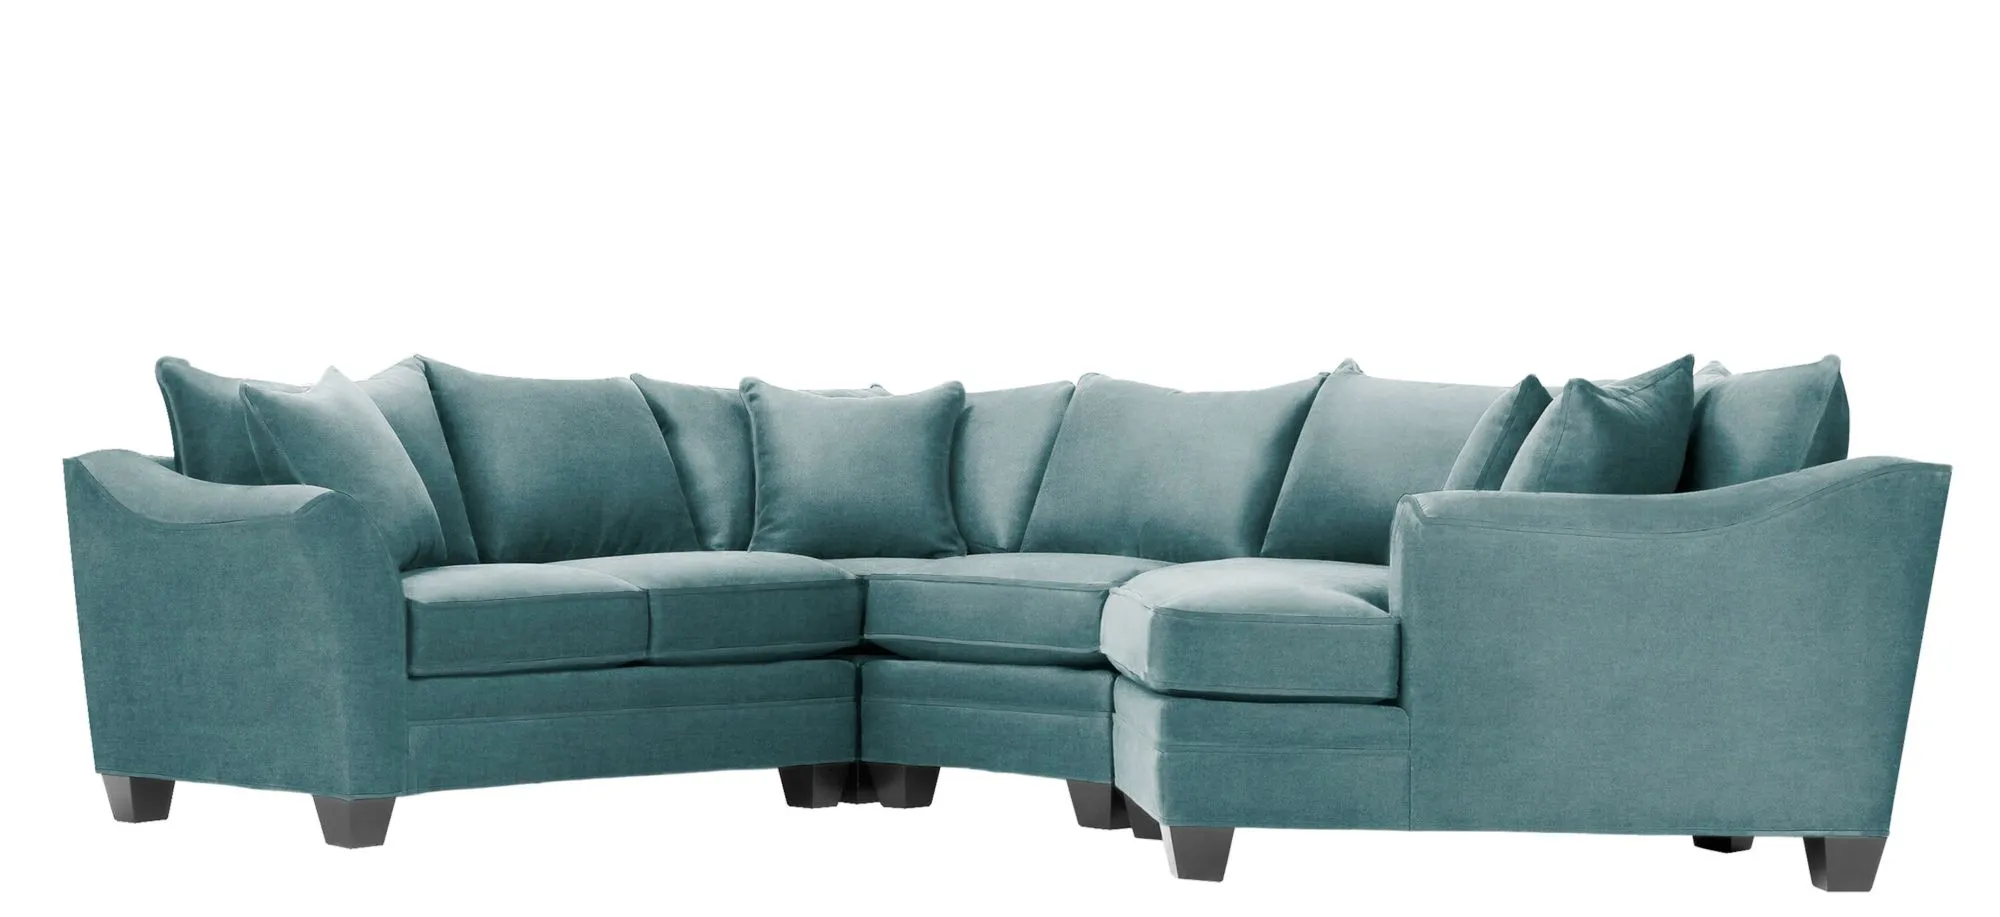 Foresthill 4-pc. Right Hand Cuddler Sectional Sofa in Santa Rosa Turquoise by H.M. Richards